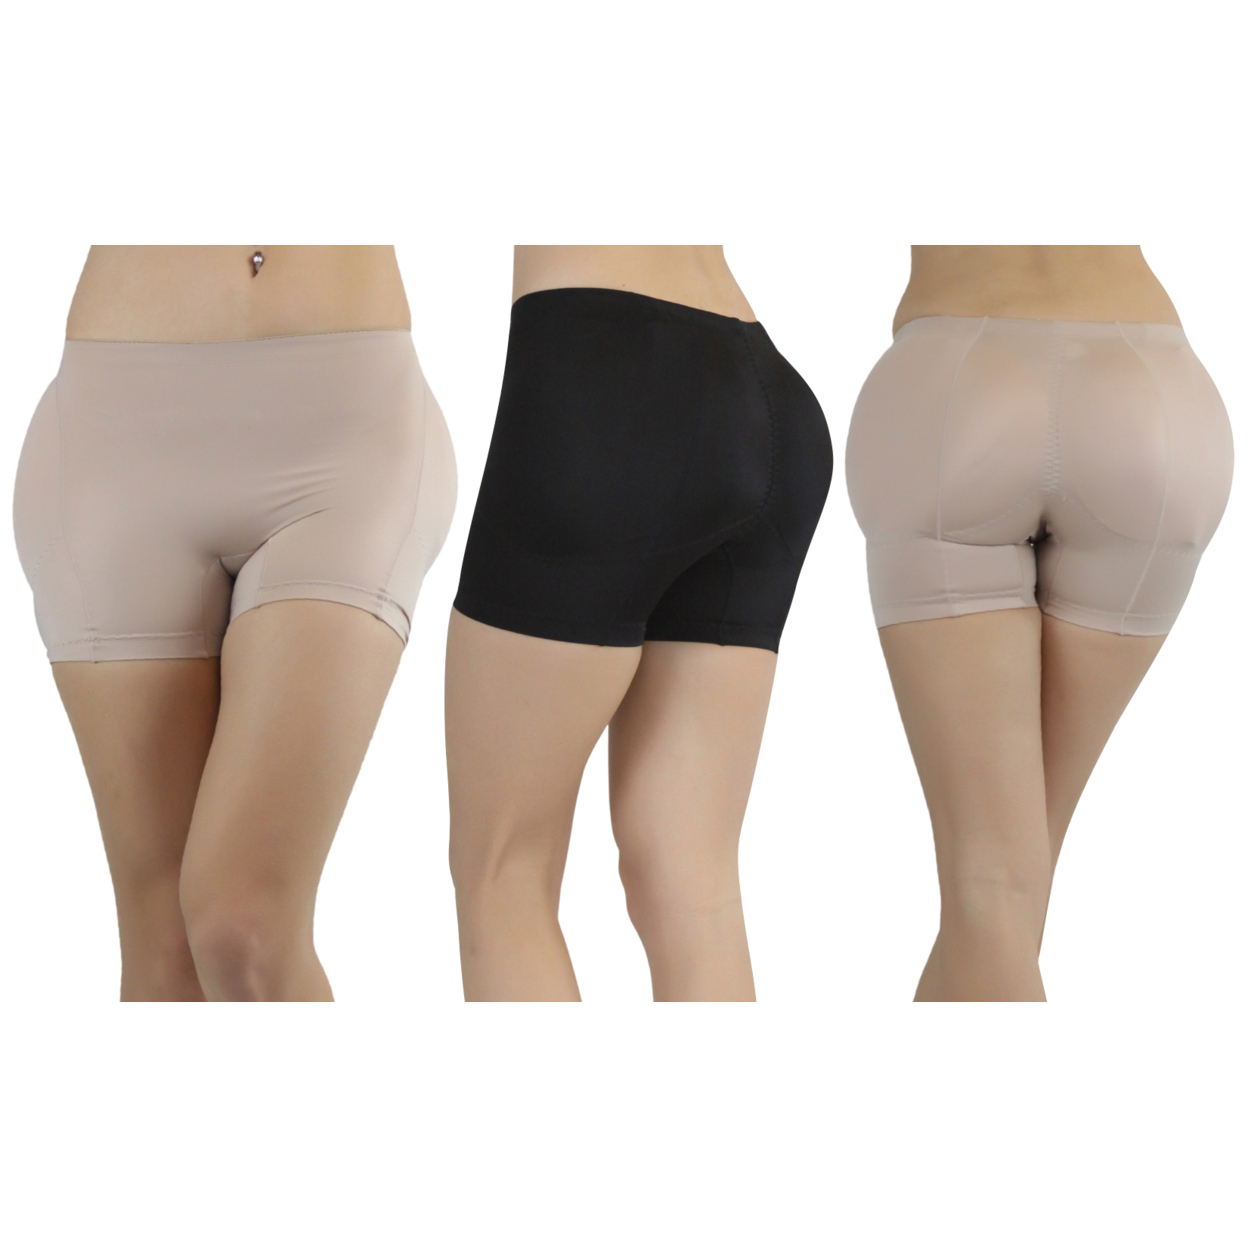 1 Or 2 Pack Of Women Butt And Hip Padded Shaper - Beige & Black, 2X